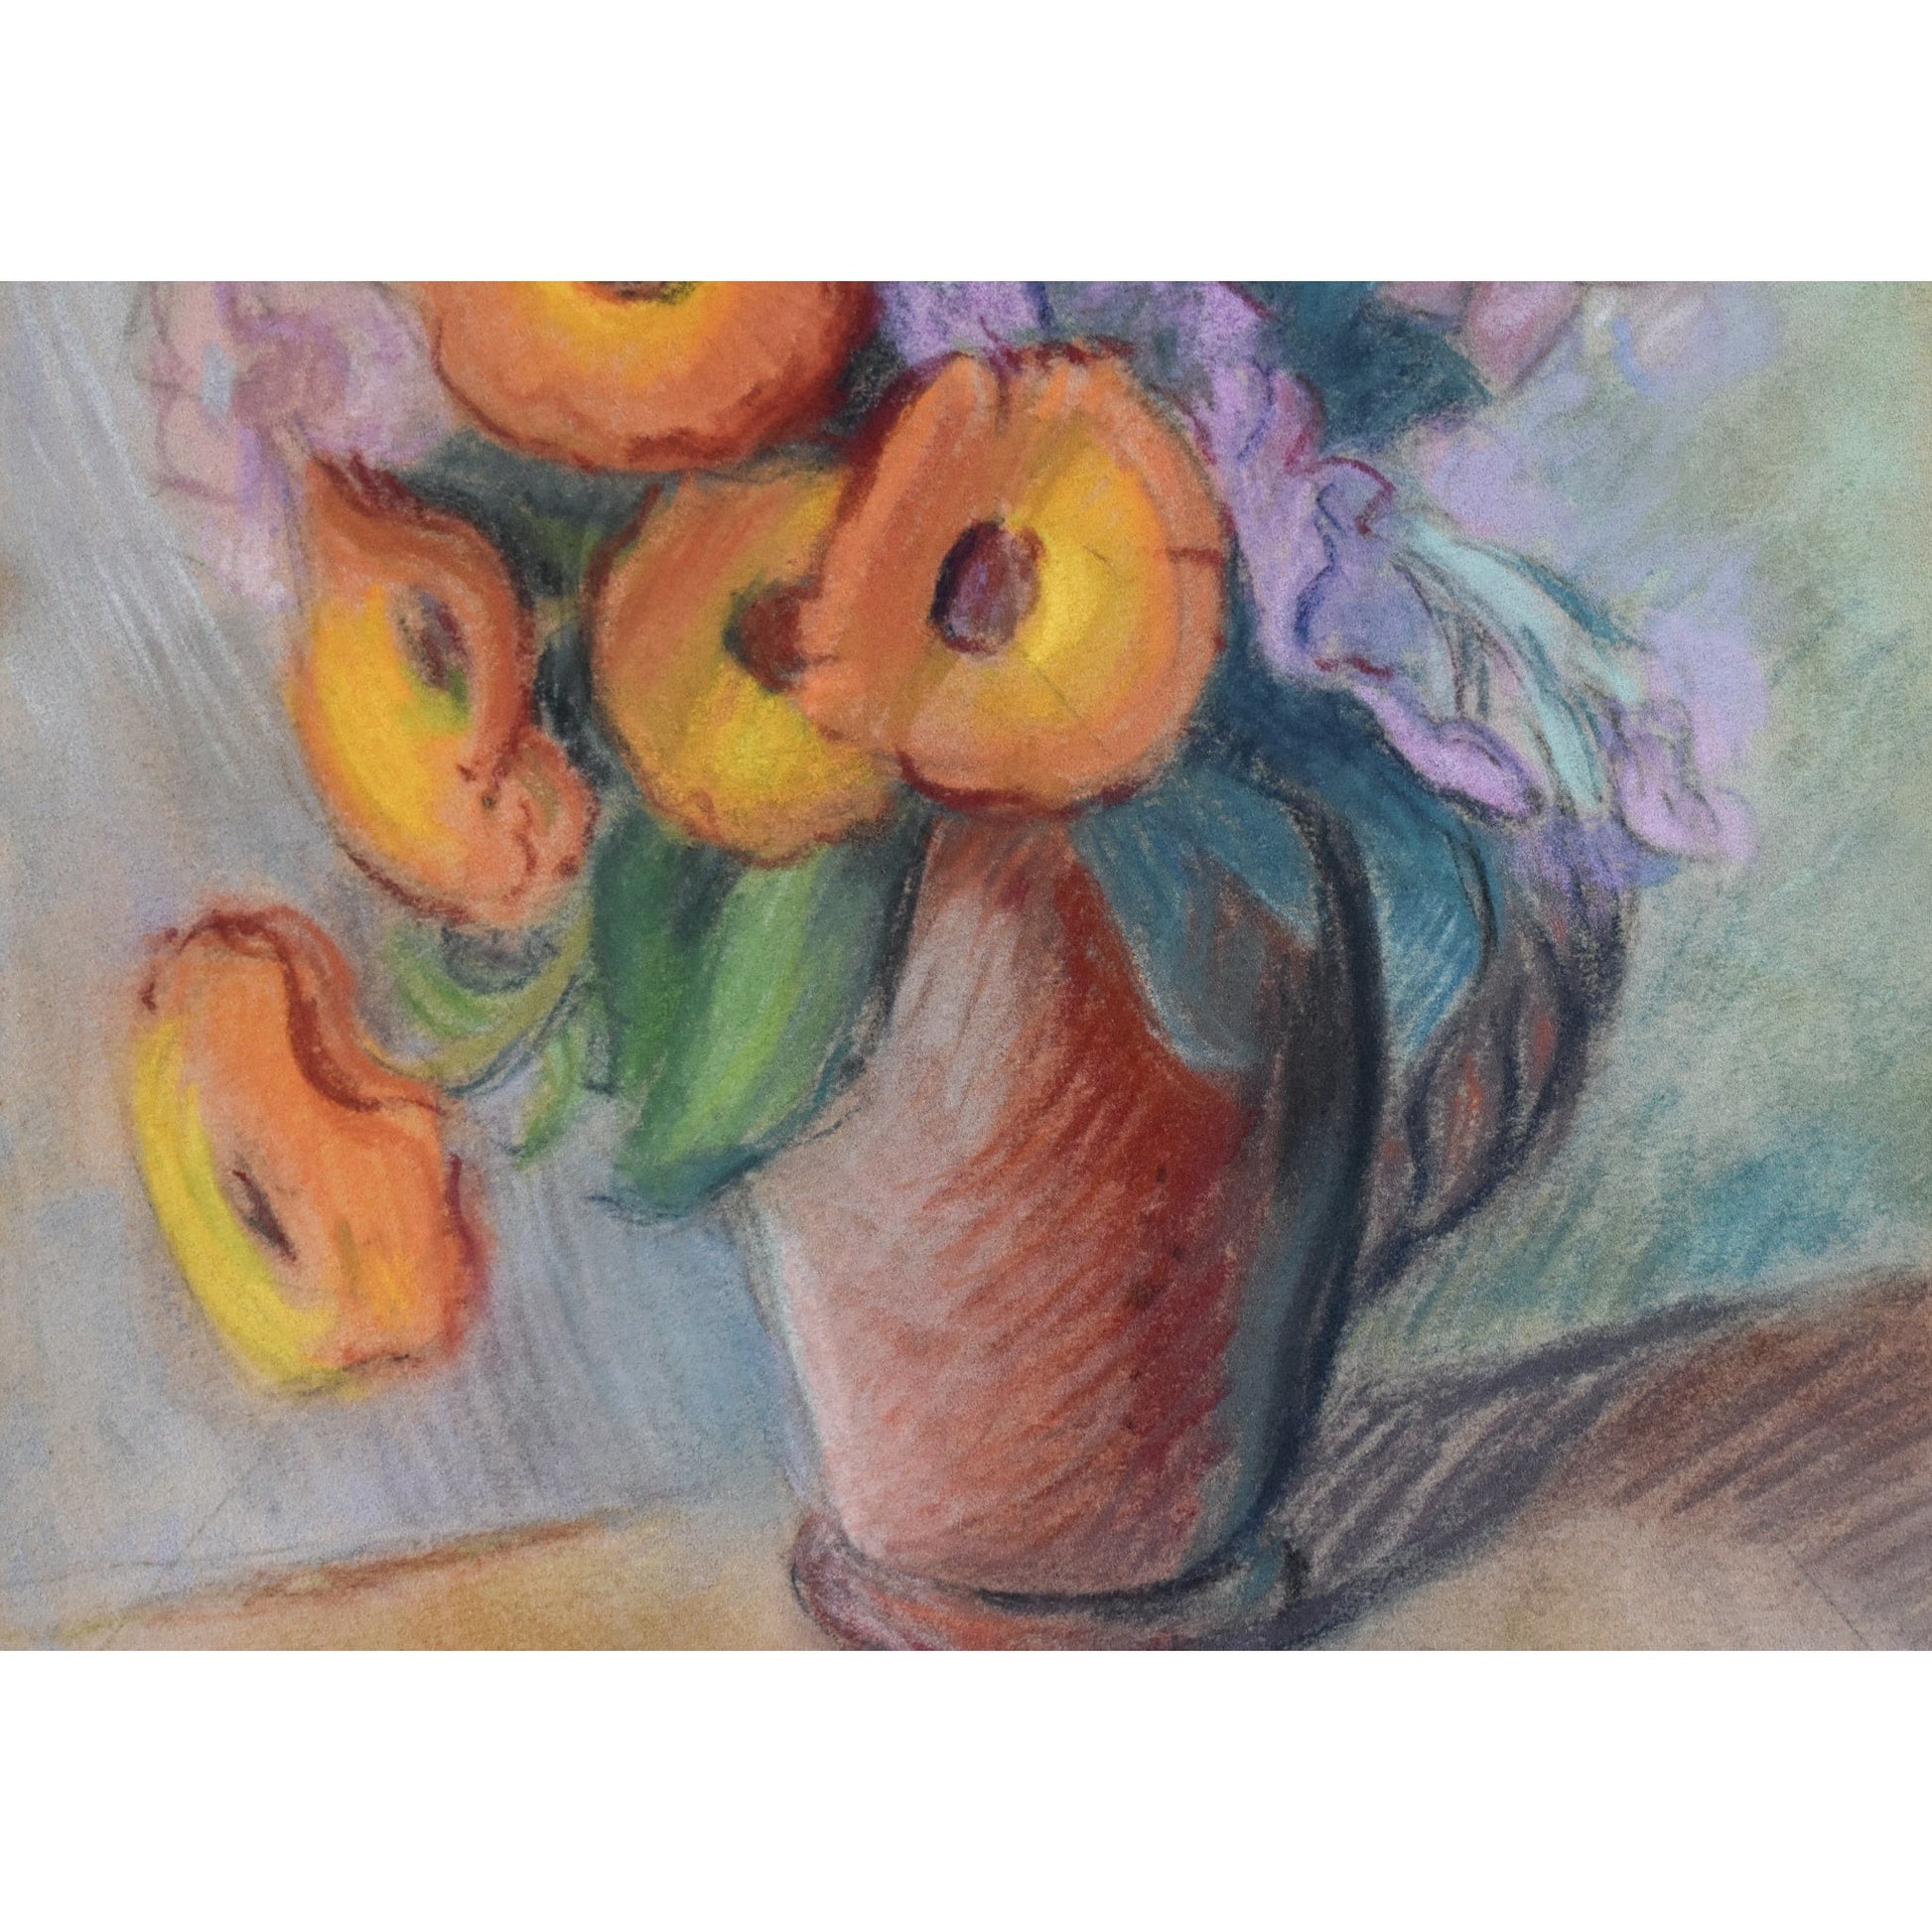 Vintage still life pastel painting, flowers in a vase circa 1950, by Claire Demartinécourt, for sale at Winckelmann Gallery